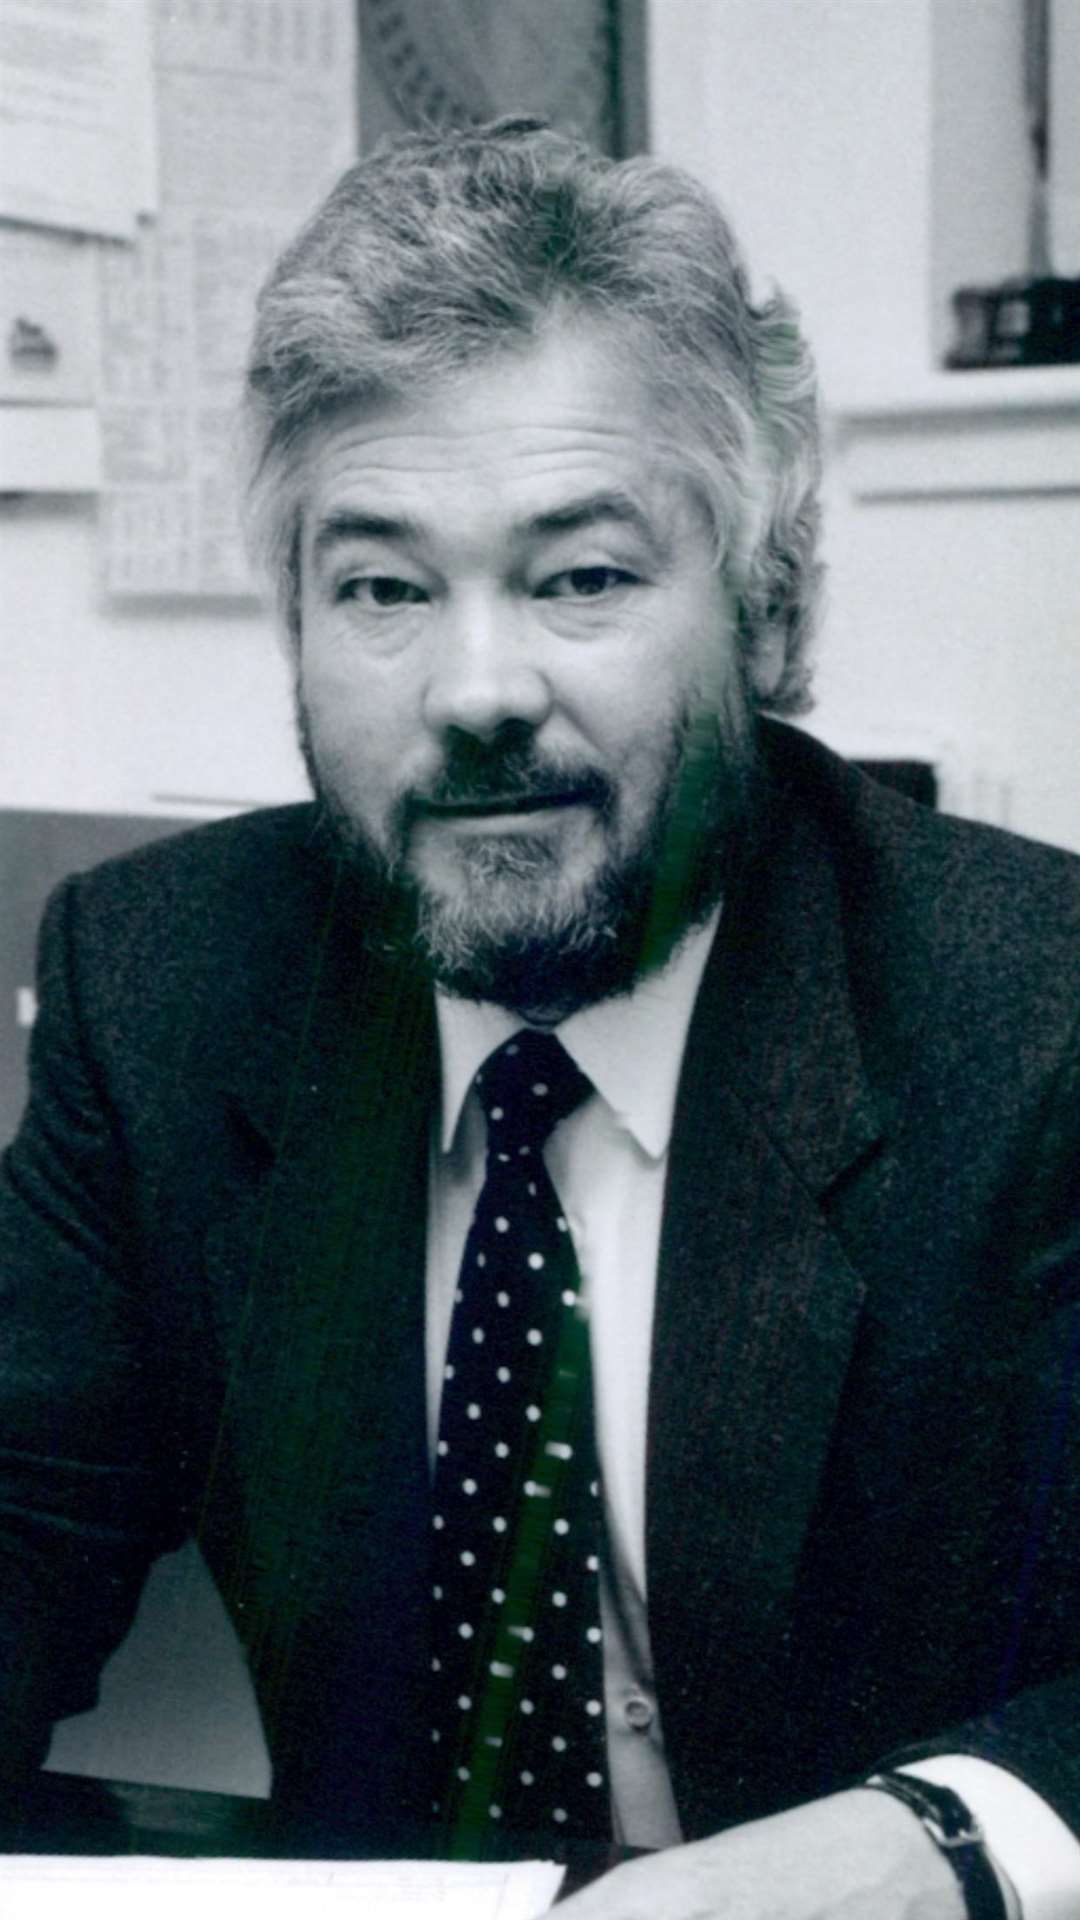 The late Richard Filmer in the late 1980s